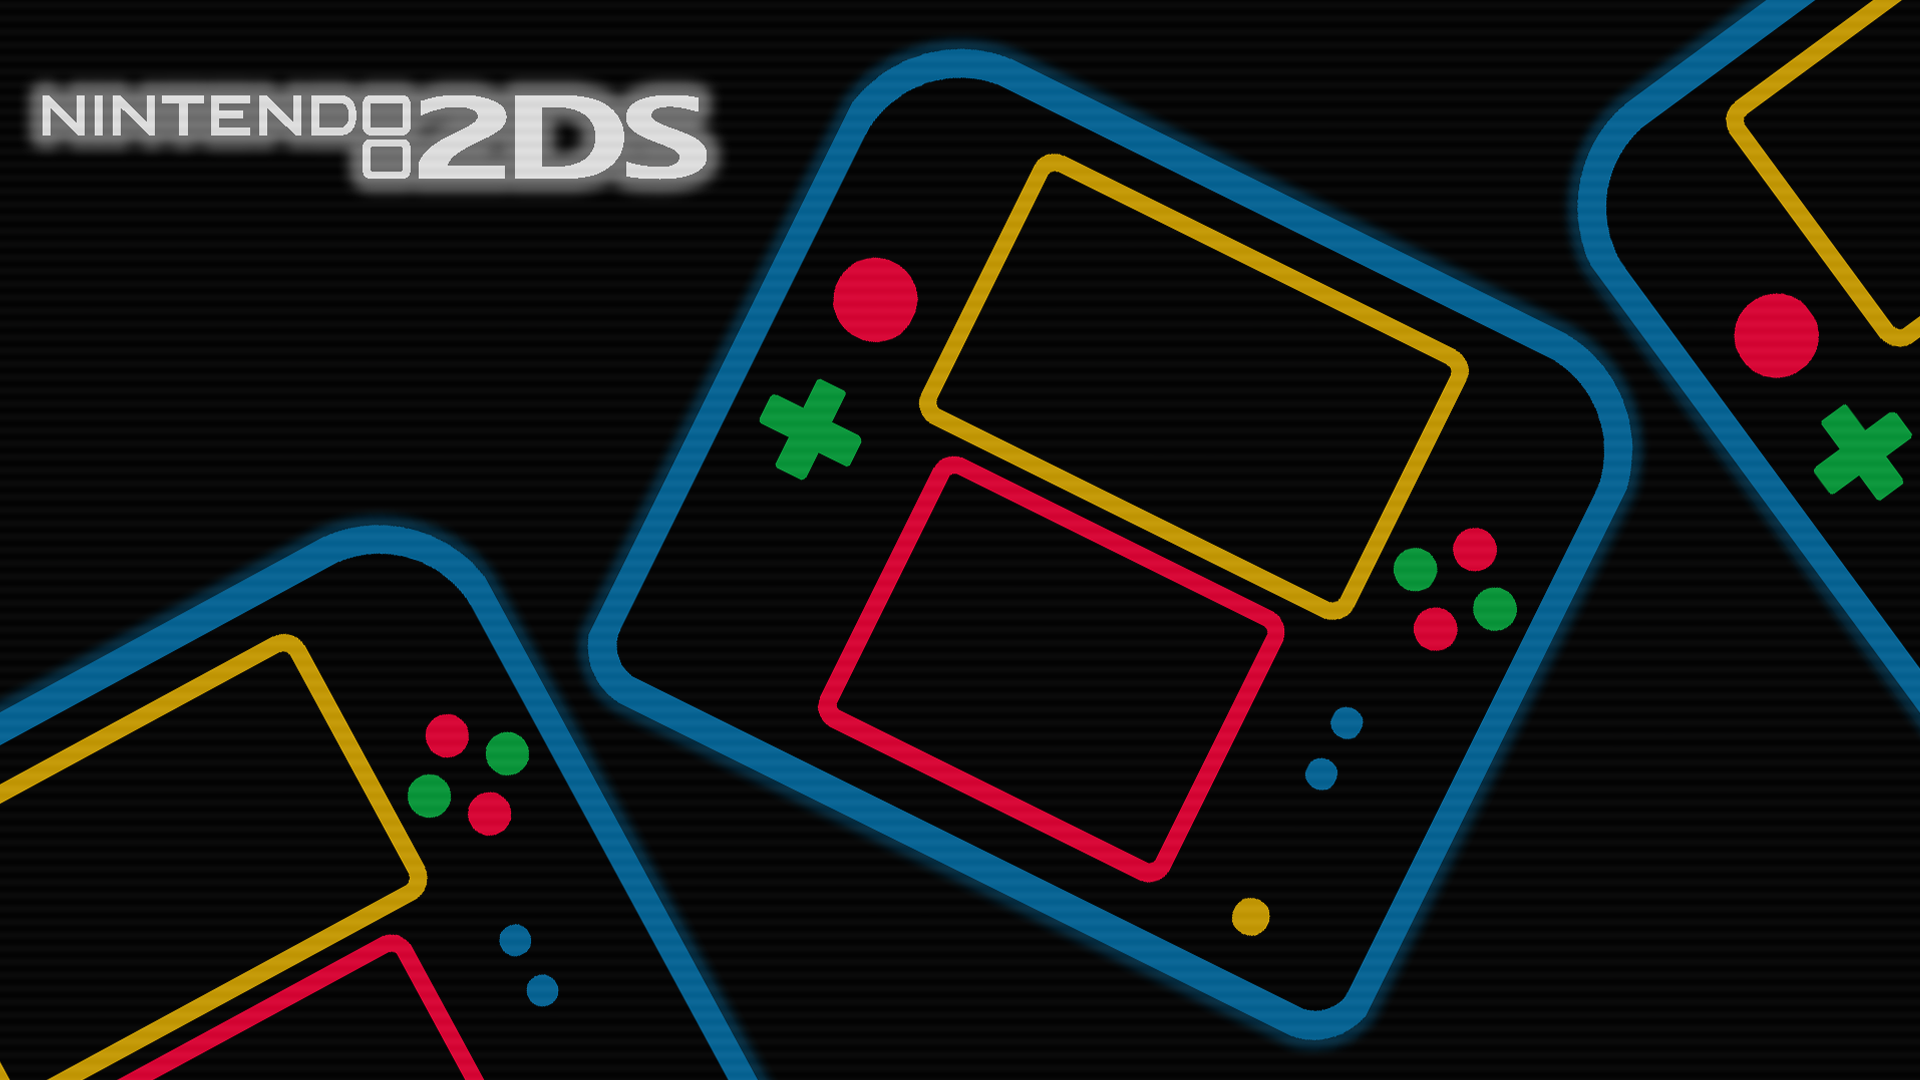 Super Famicom styled 2DS wallpaper v info in the comments